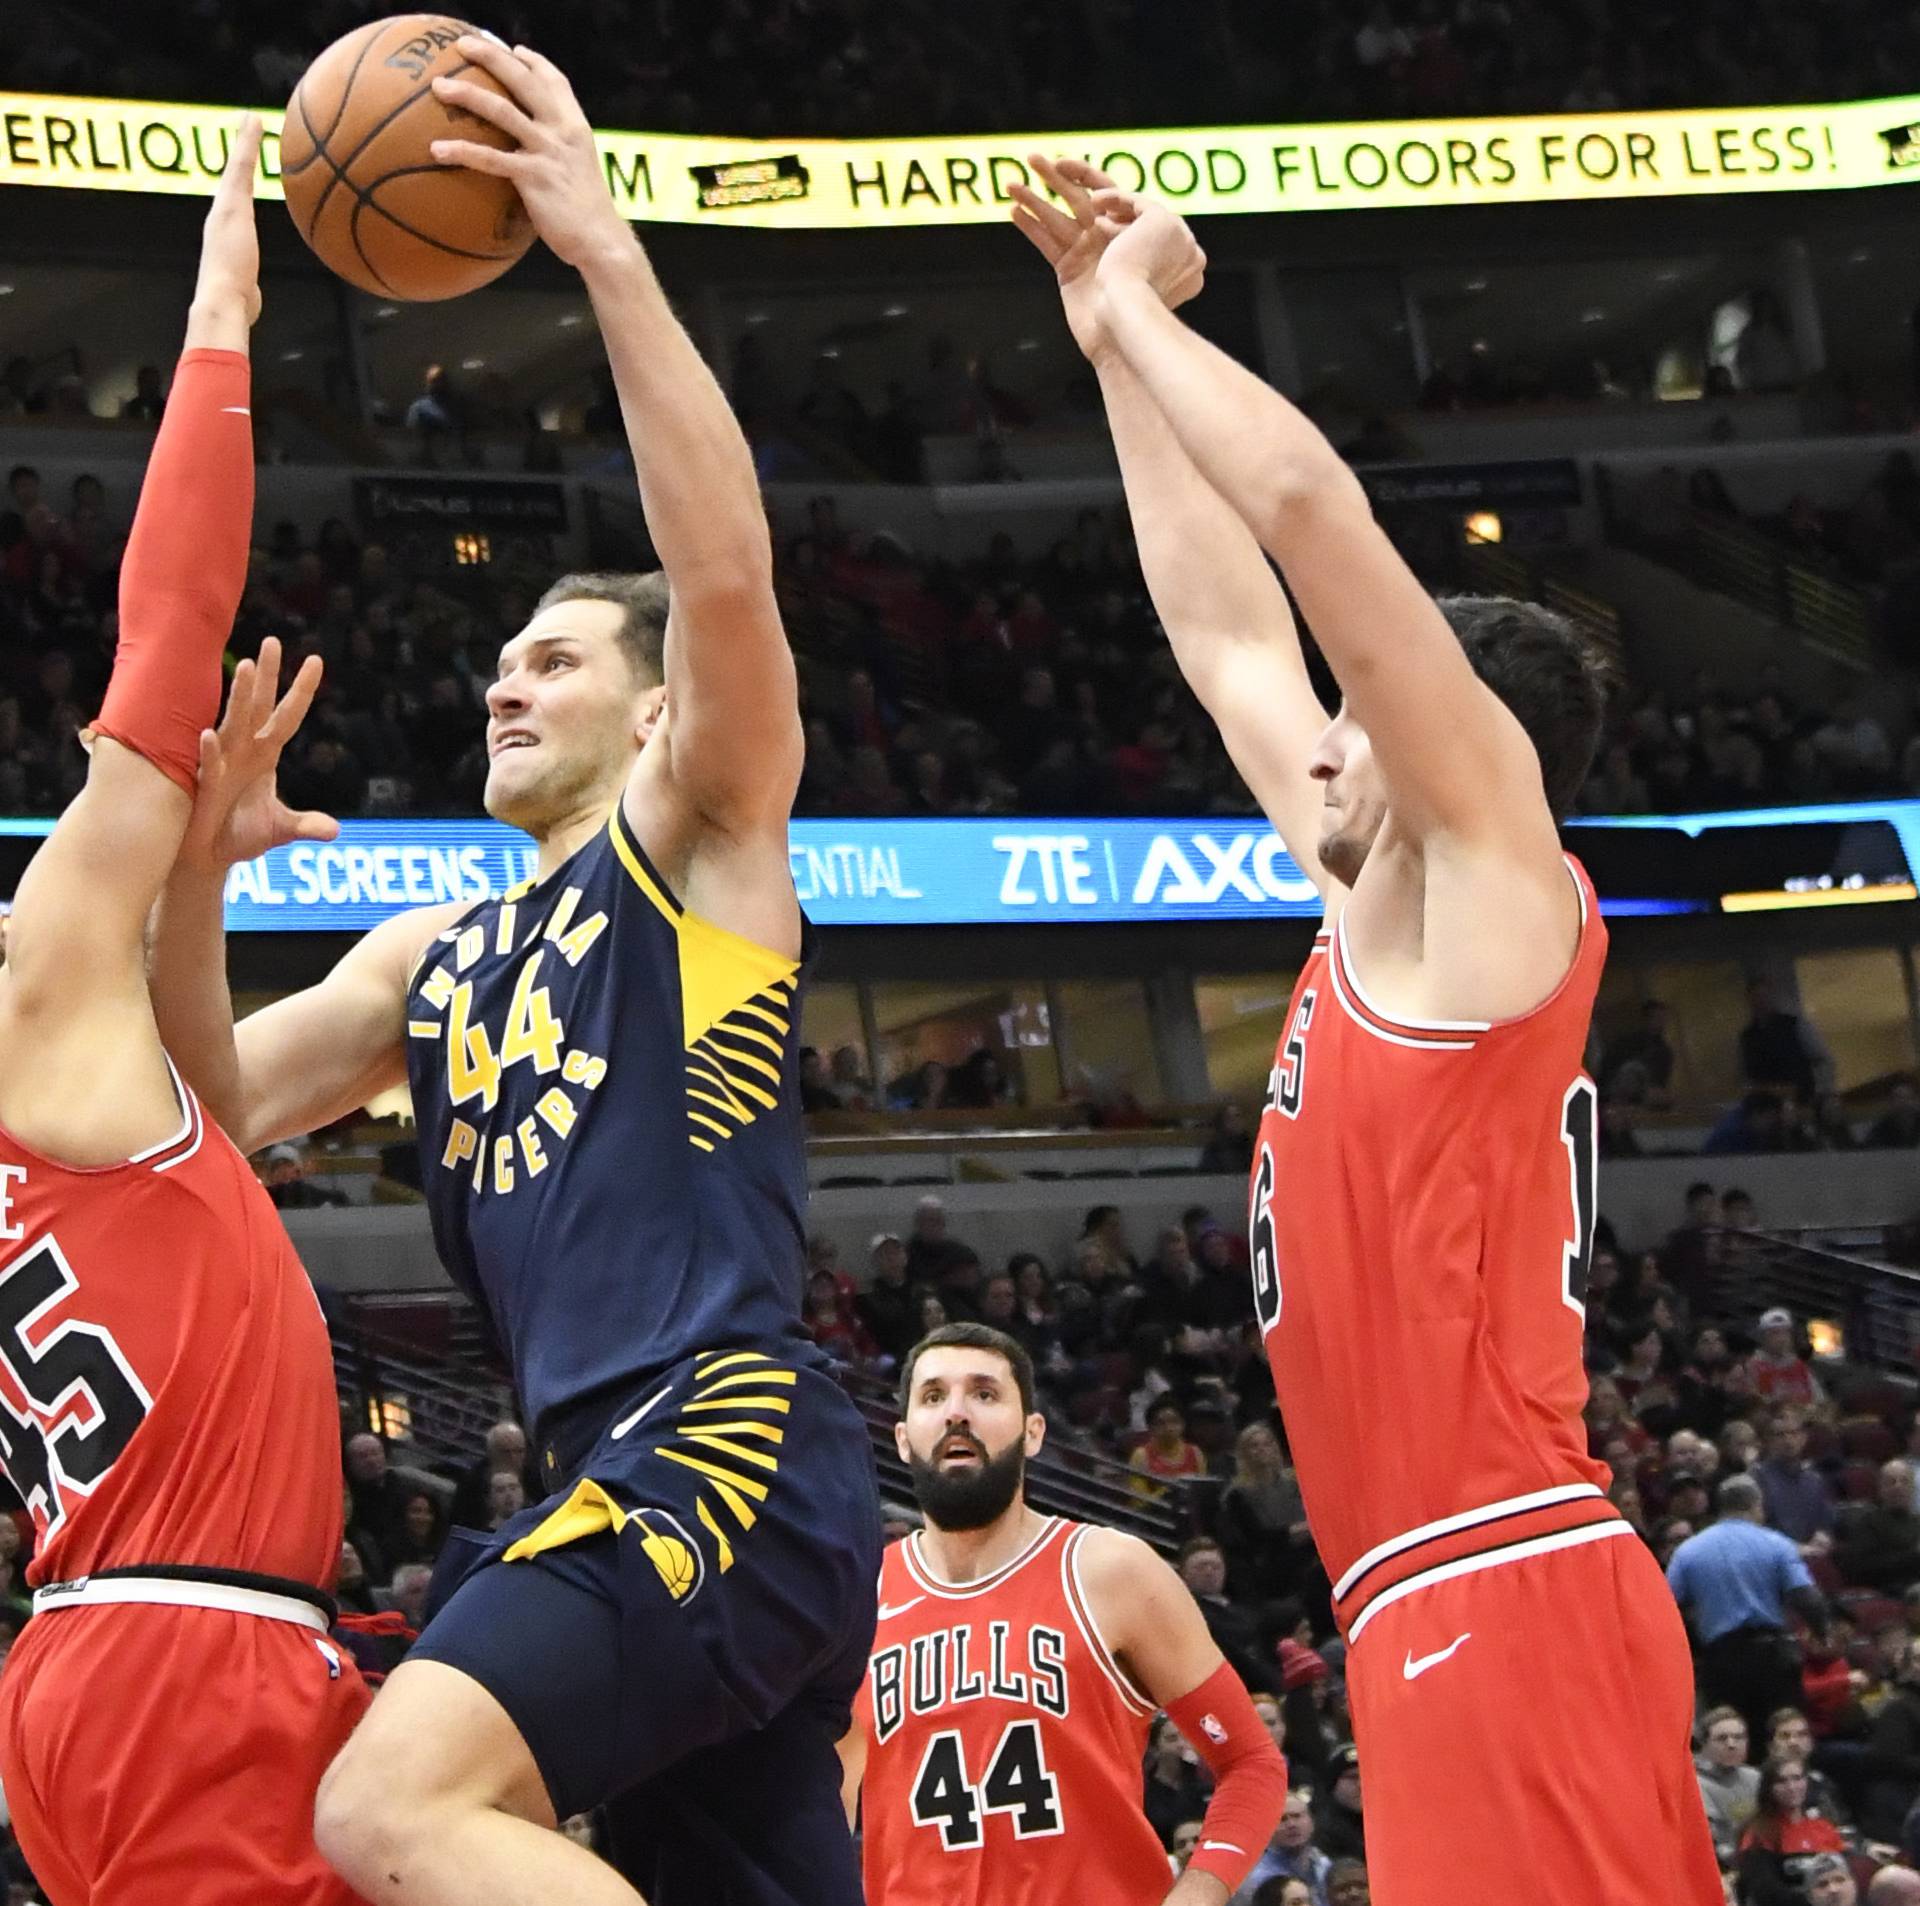 NBA: Indiana Pacers at Chicago Bulls